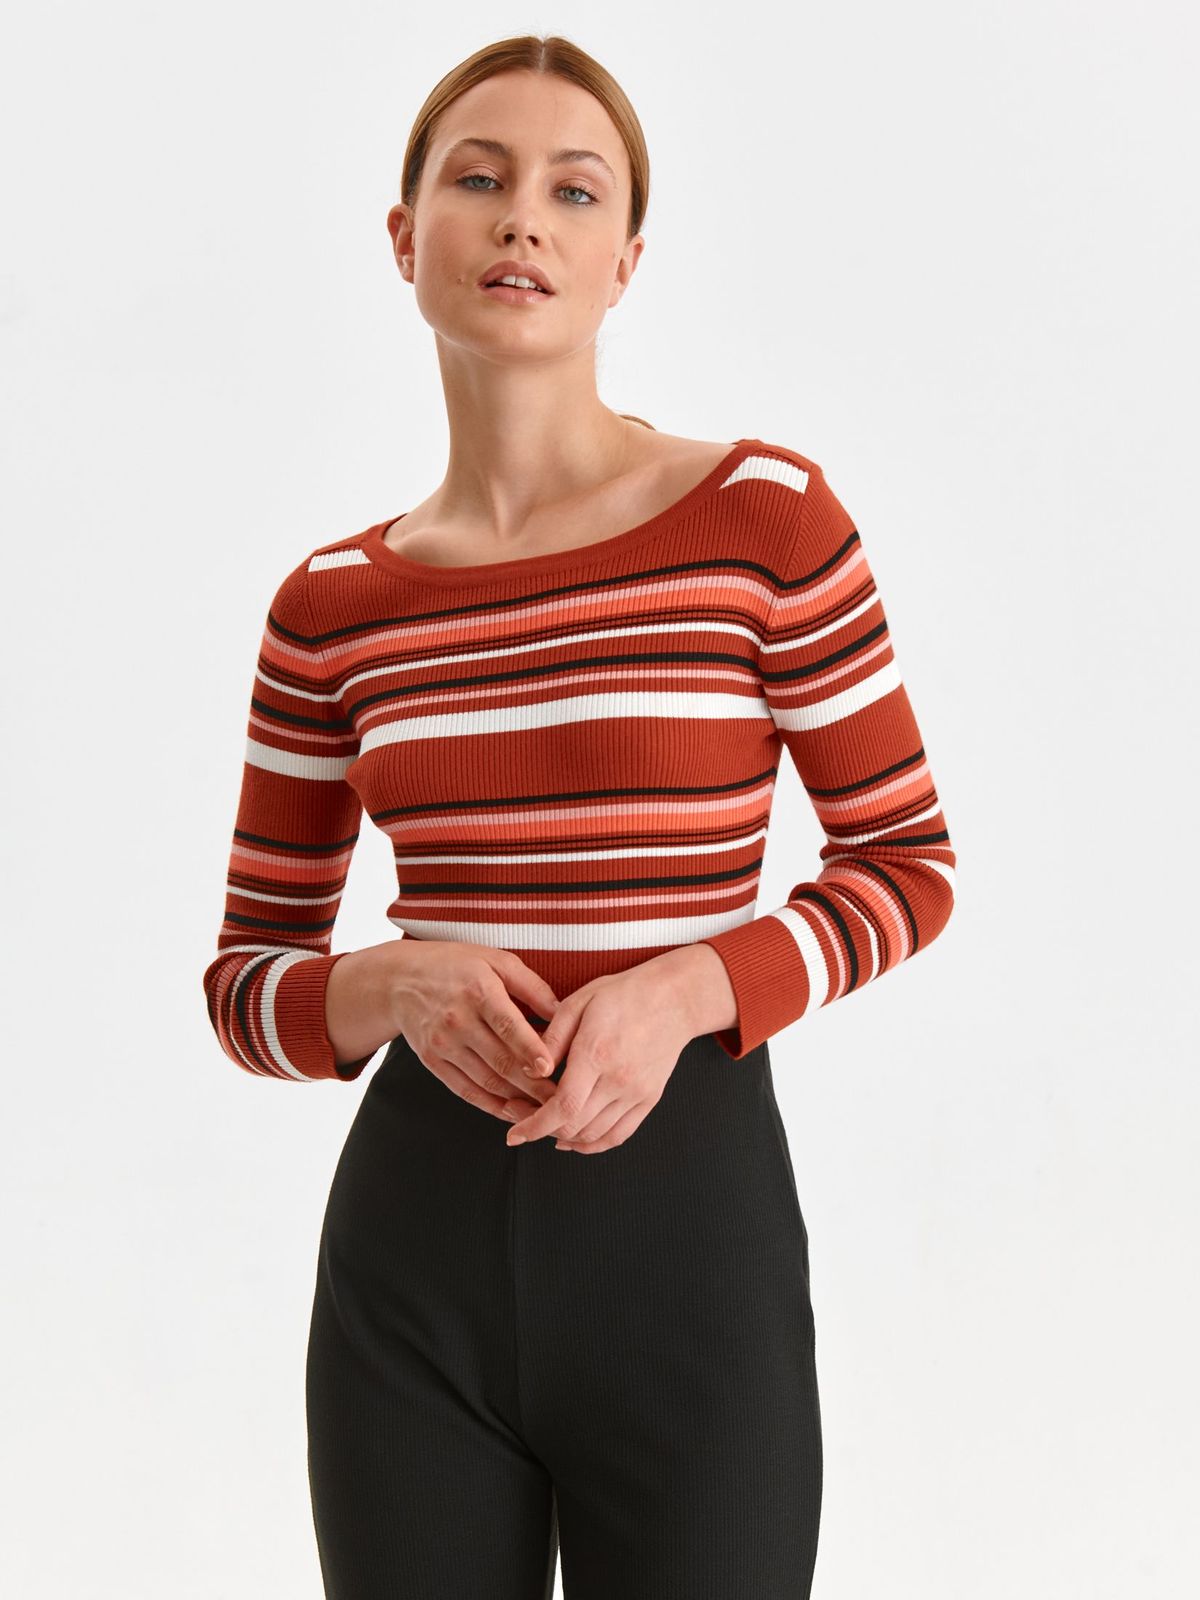 Red sweater from striped fabric with stripes